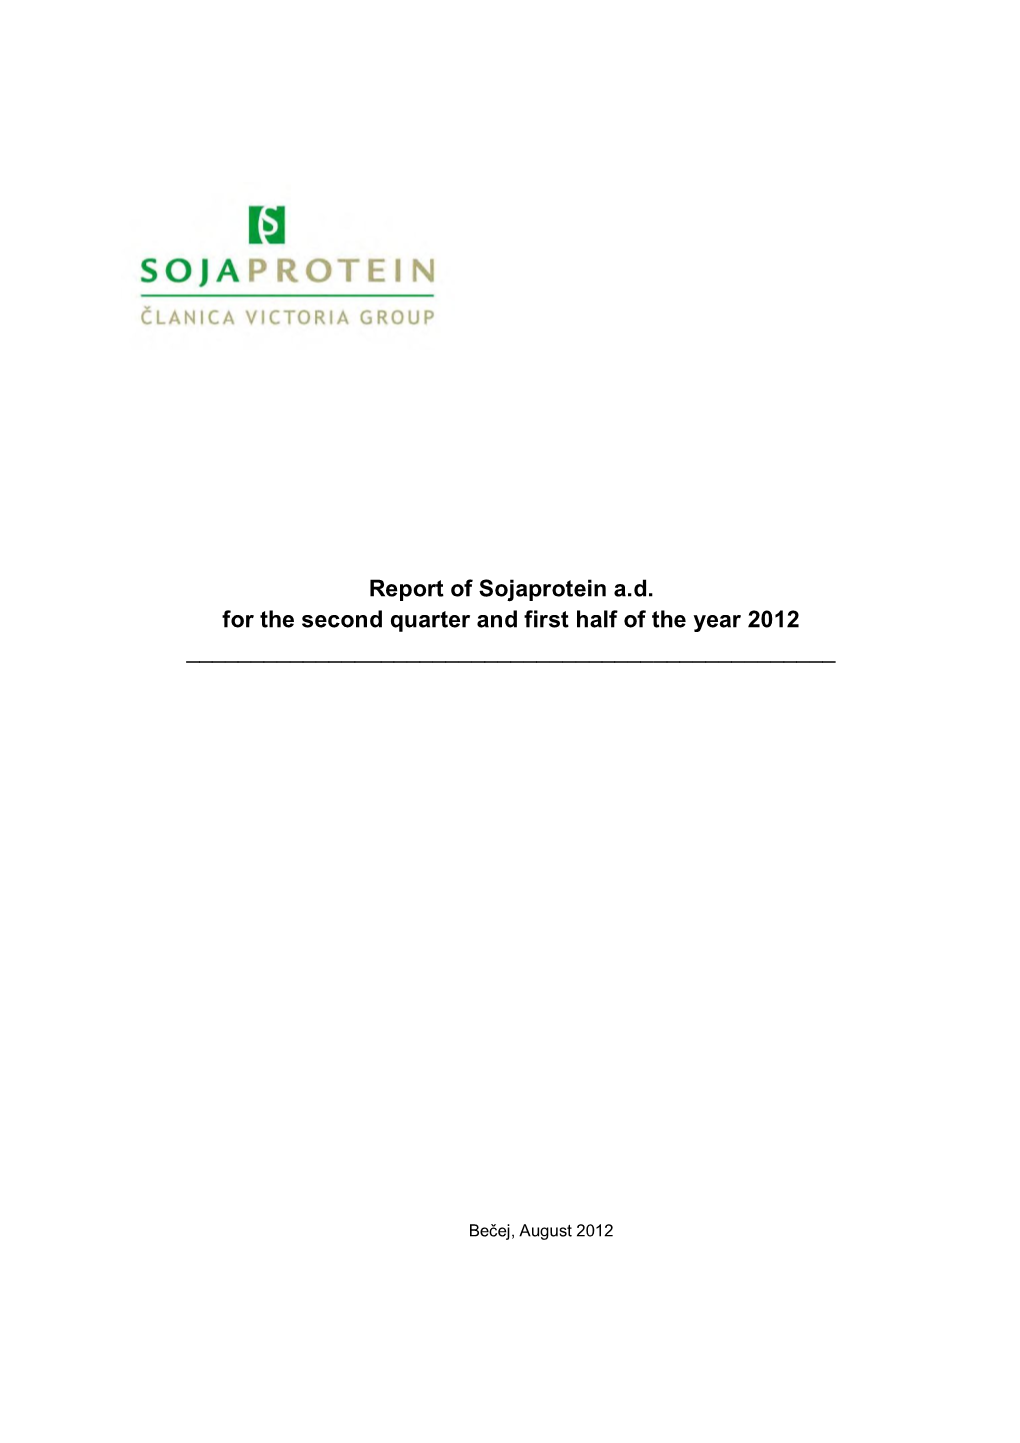 Report of Sojaprotein A.D. for the Second Quarter and First Half of the Year 2012 ______